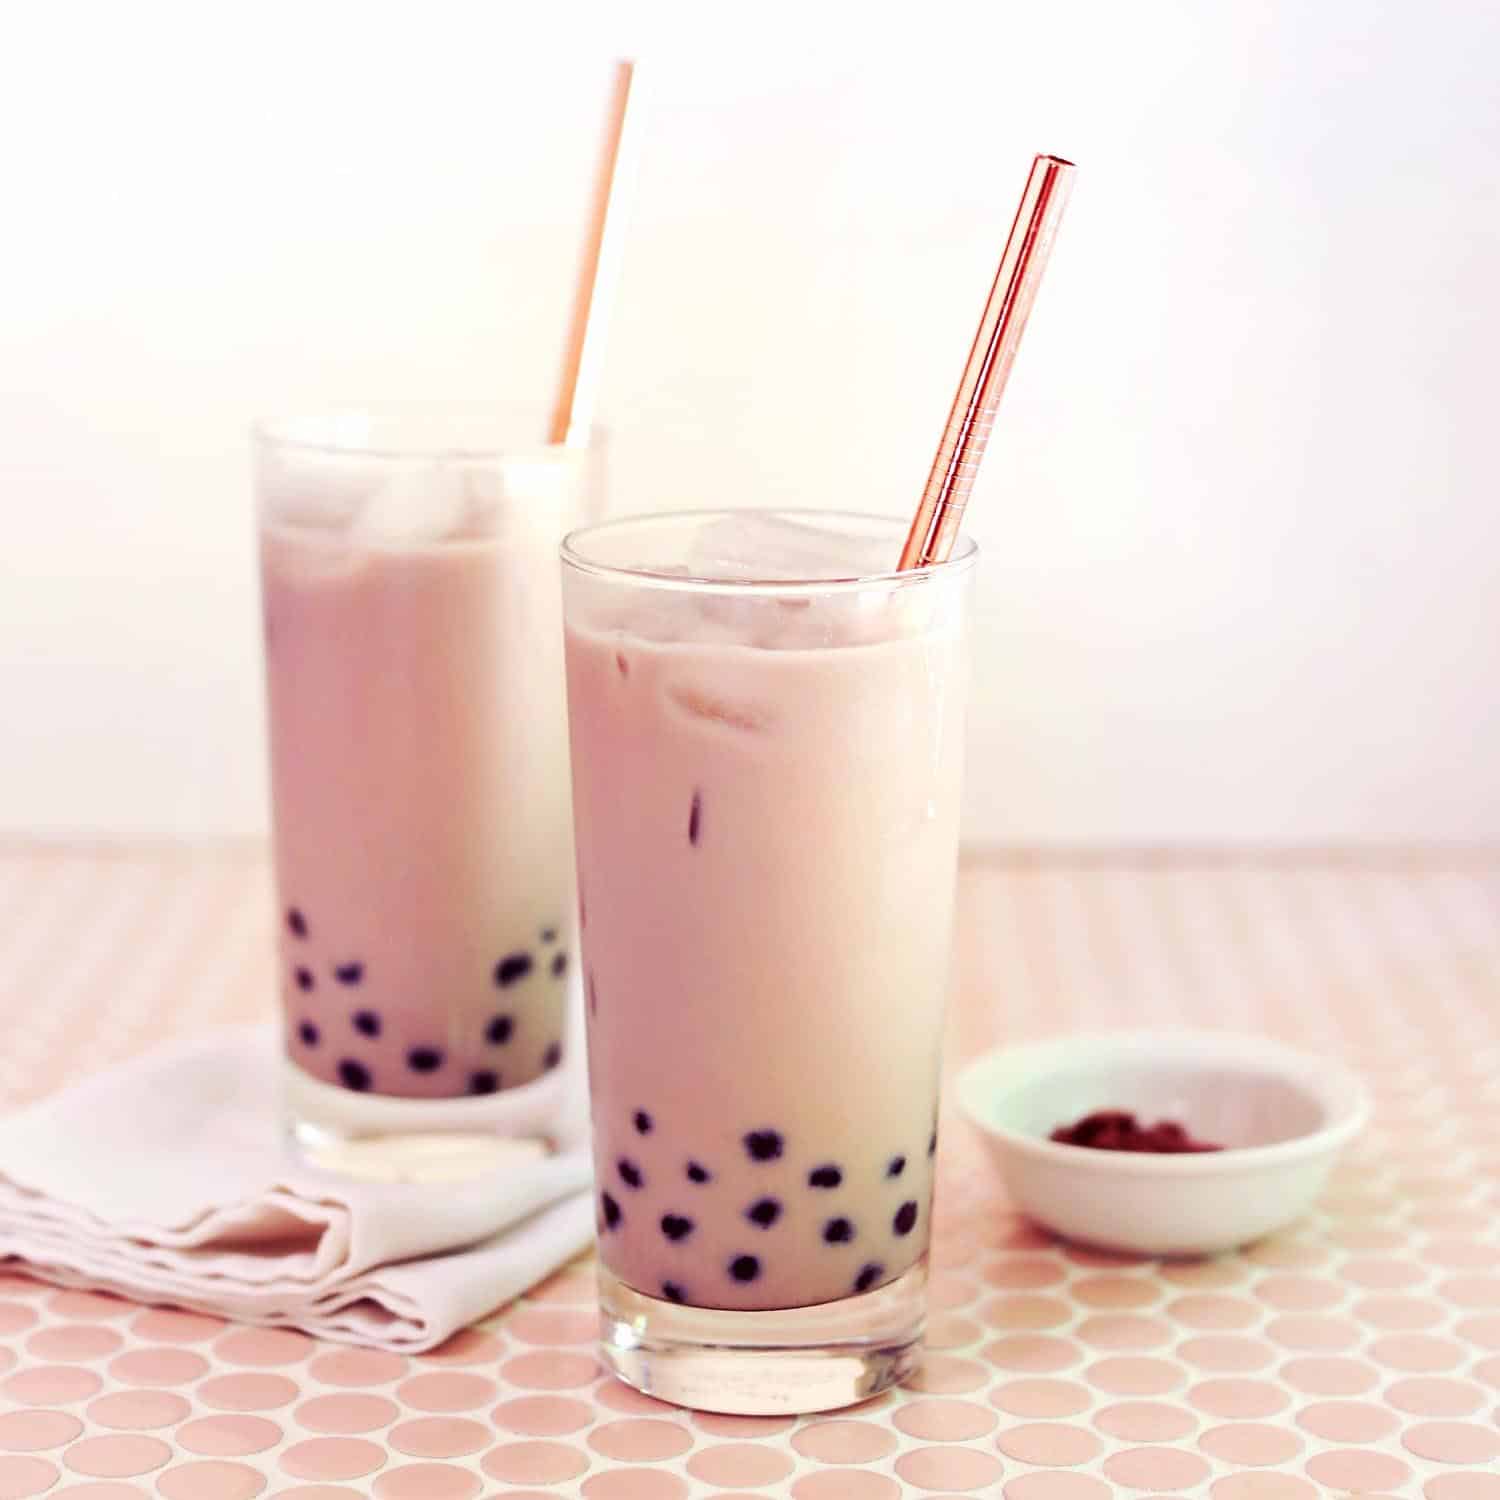 How to Prepare Boba Pearls at Home